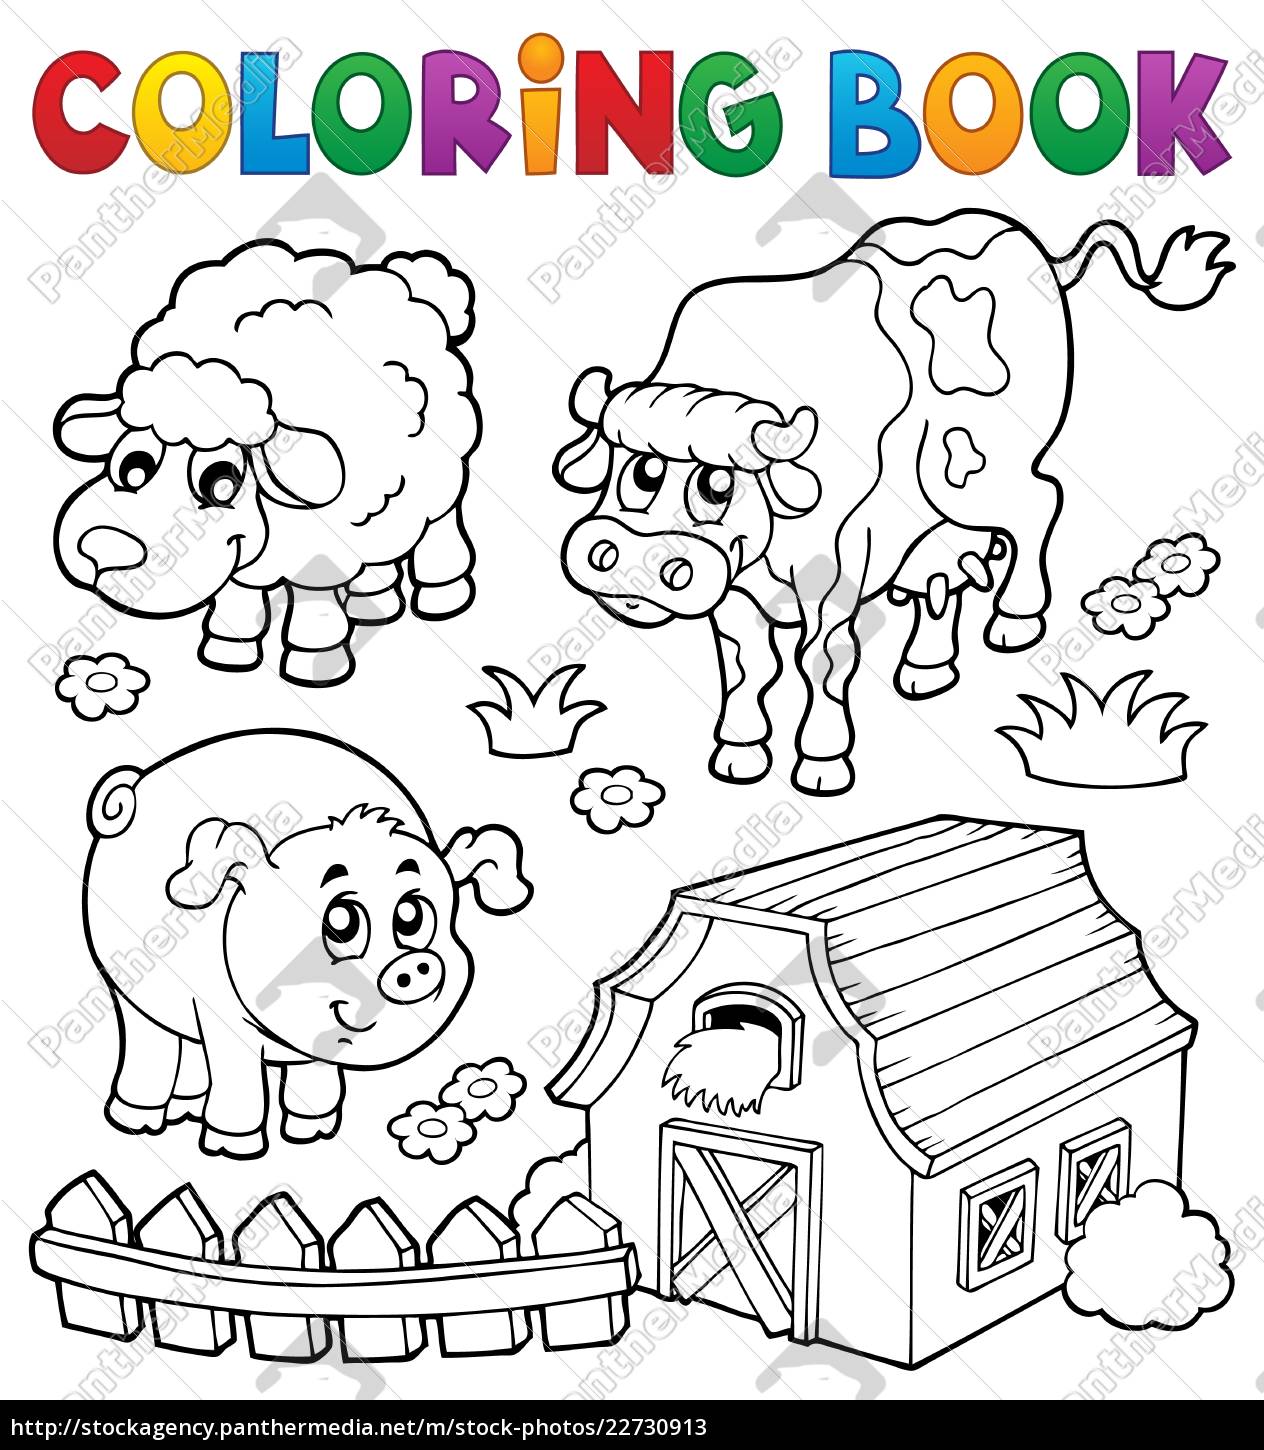 Download Coloring Book With Farm Animals 6 Royalty Free Image 22730913 Panthermedia Stock Agency